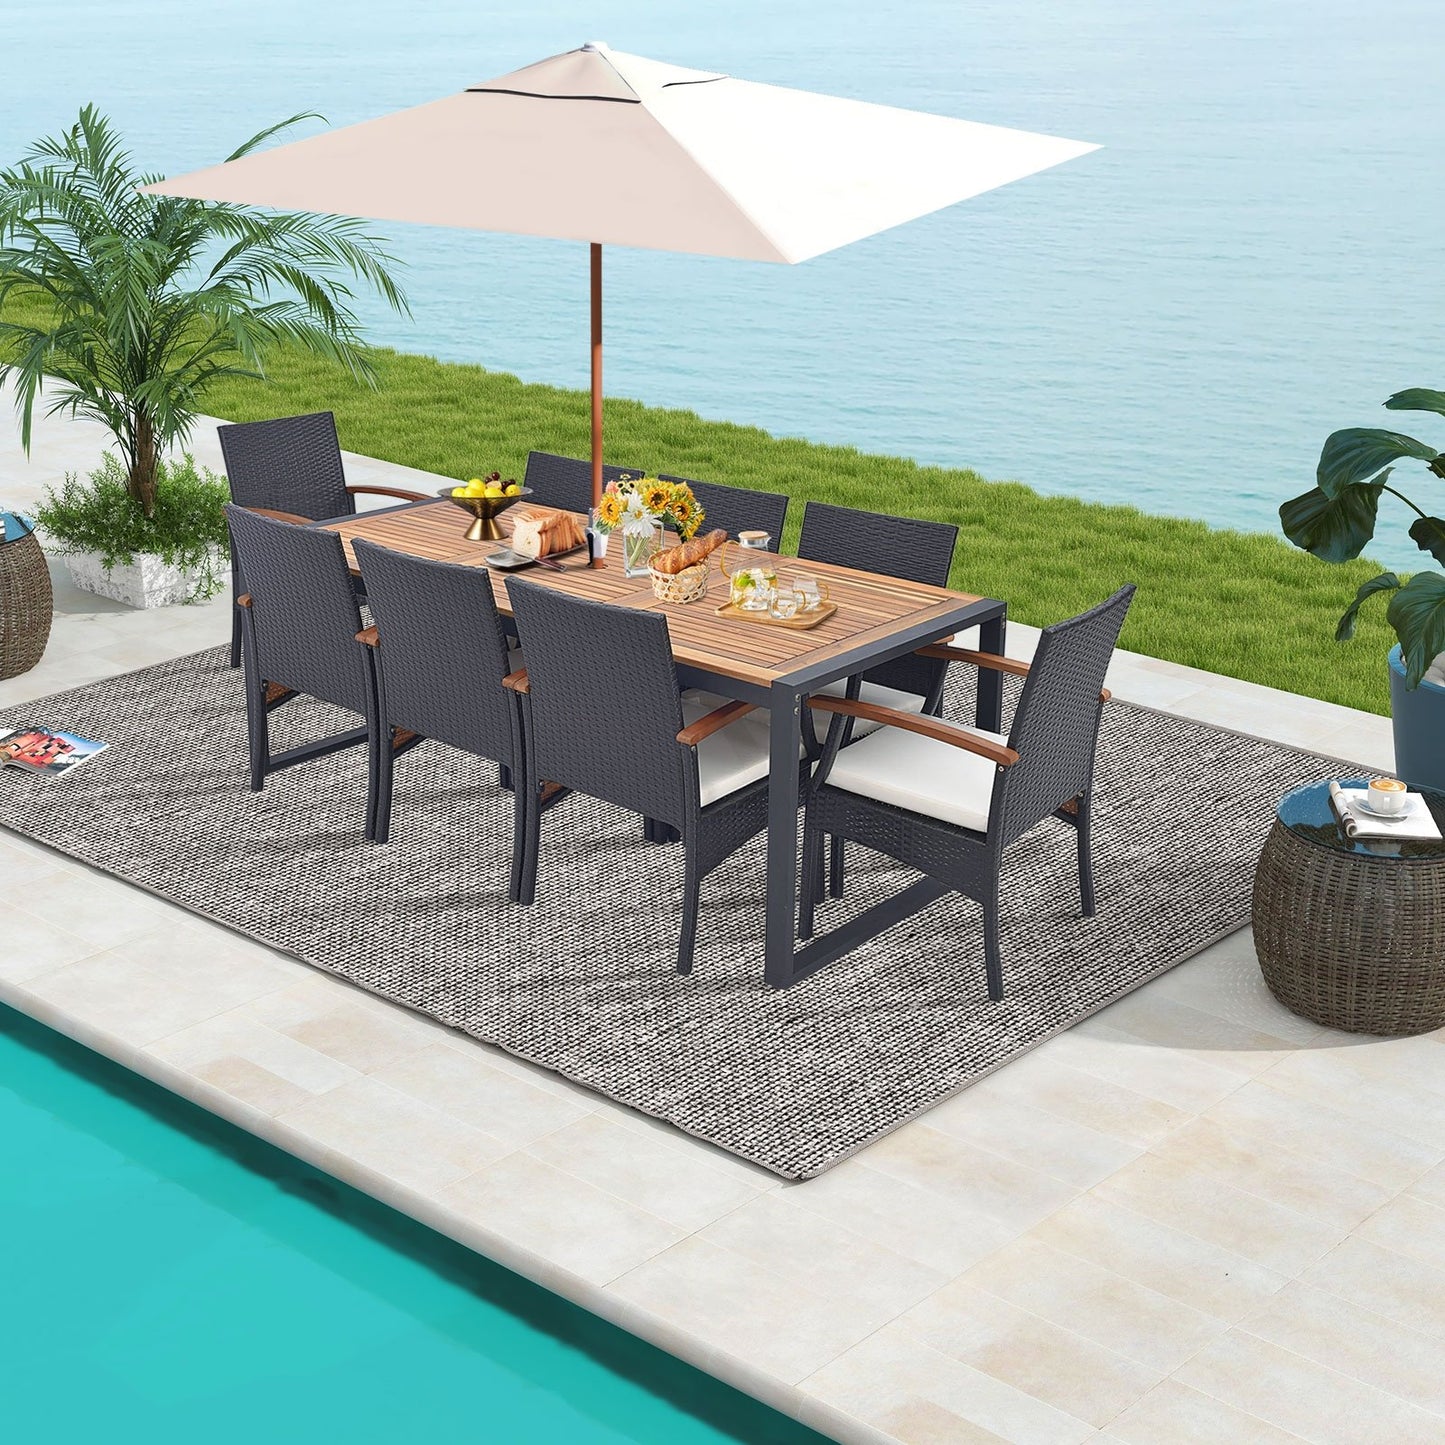 9 Pieces  Patio Rattan Dining Set with Acacia Wood Table for Backyard  Garden-Wood Handrail